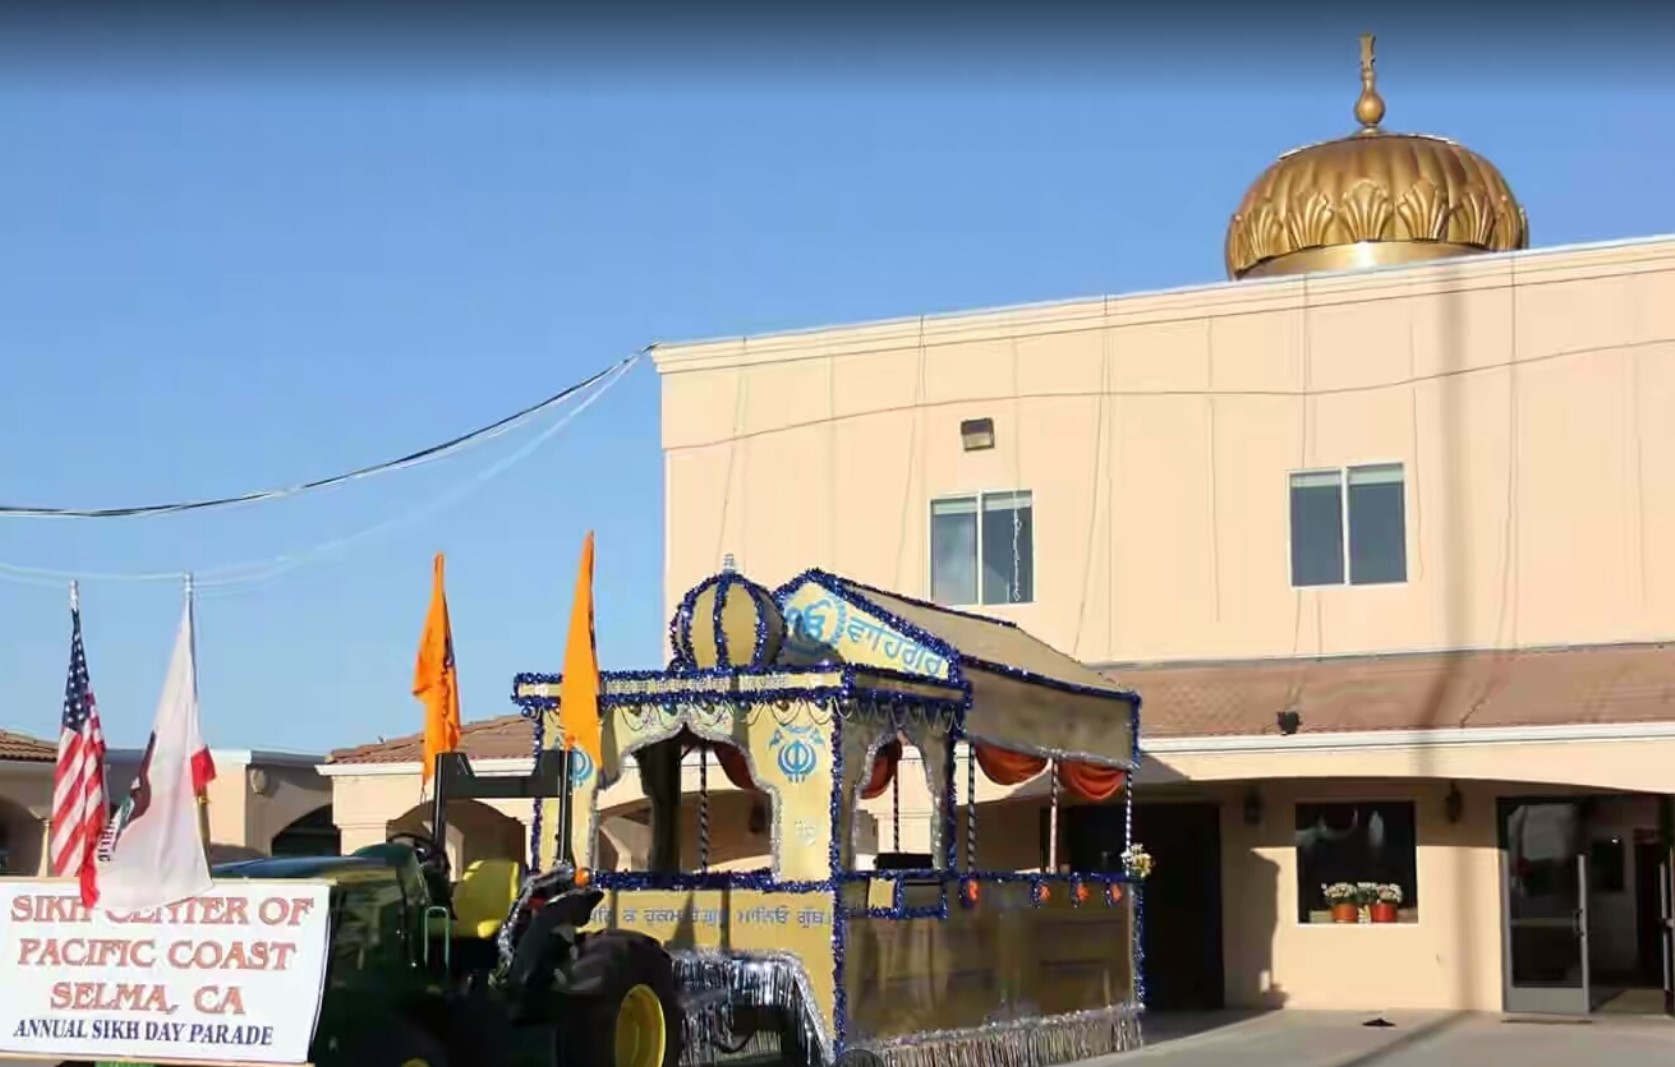 Sikh Center of the Pacific Coast Selma